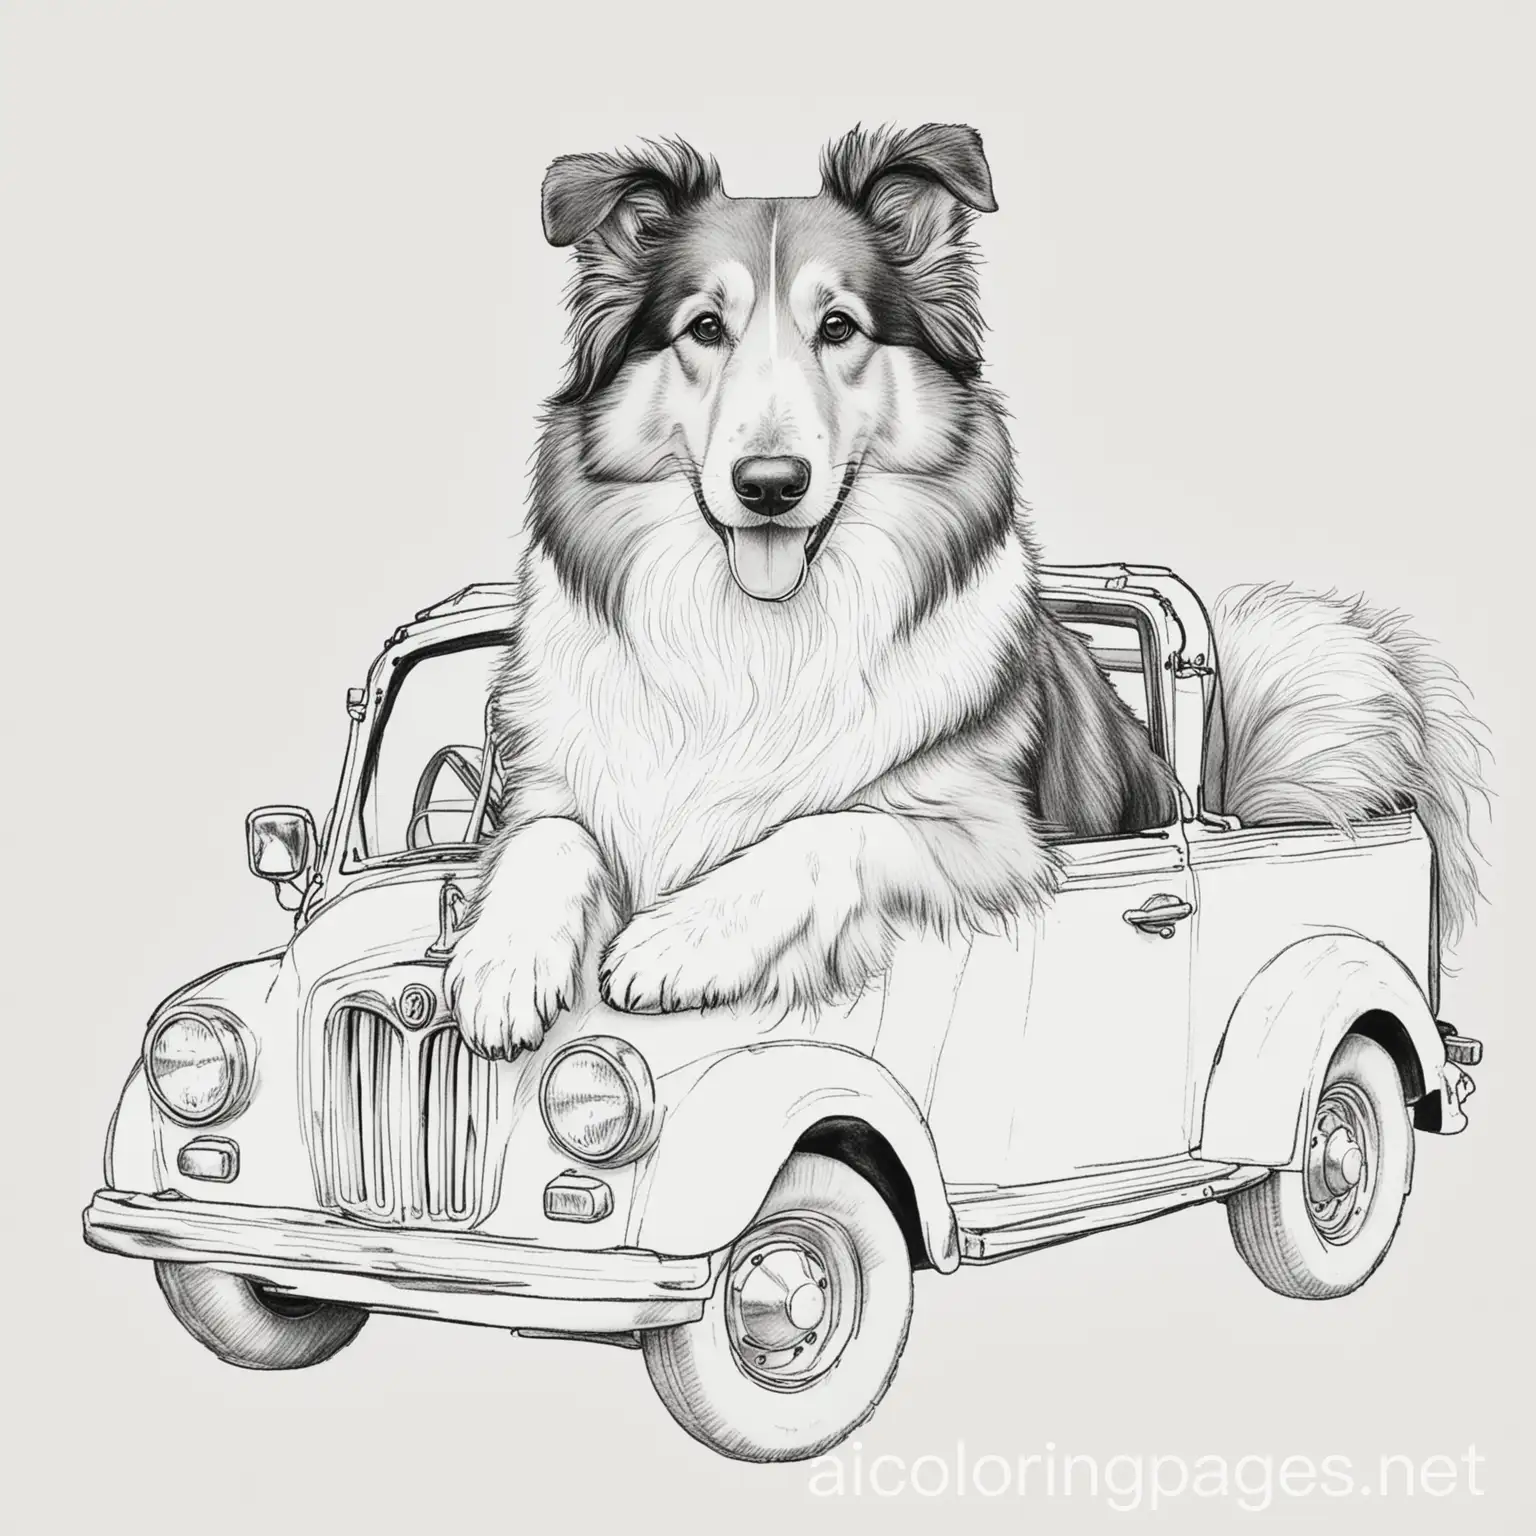 A rough collie riding in a car, Coloring Page, black and white, line art, white background, Simplicity, Ample White Space. The background of the coloring page is plain white to make it easy for young children to color within the lines. The outlines of all the subjects are easy to distinguish, making it simple for kids to color without too much difficulty